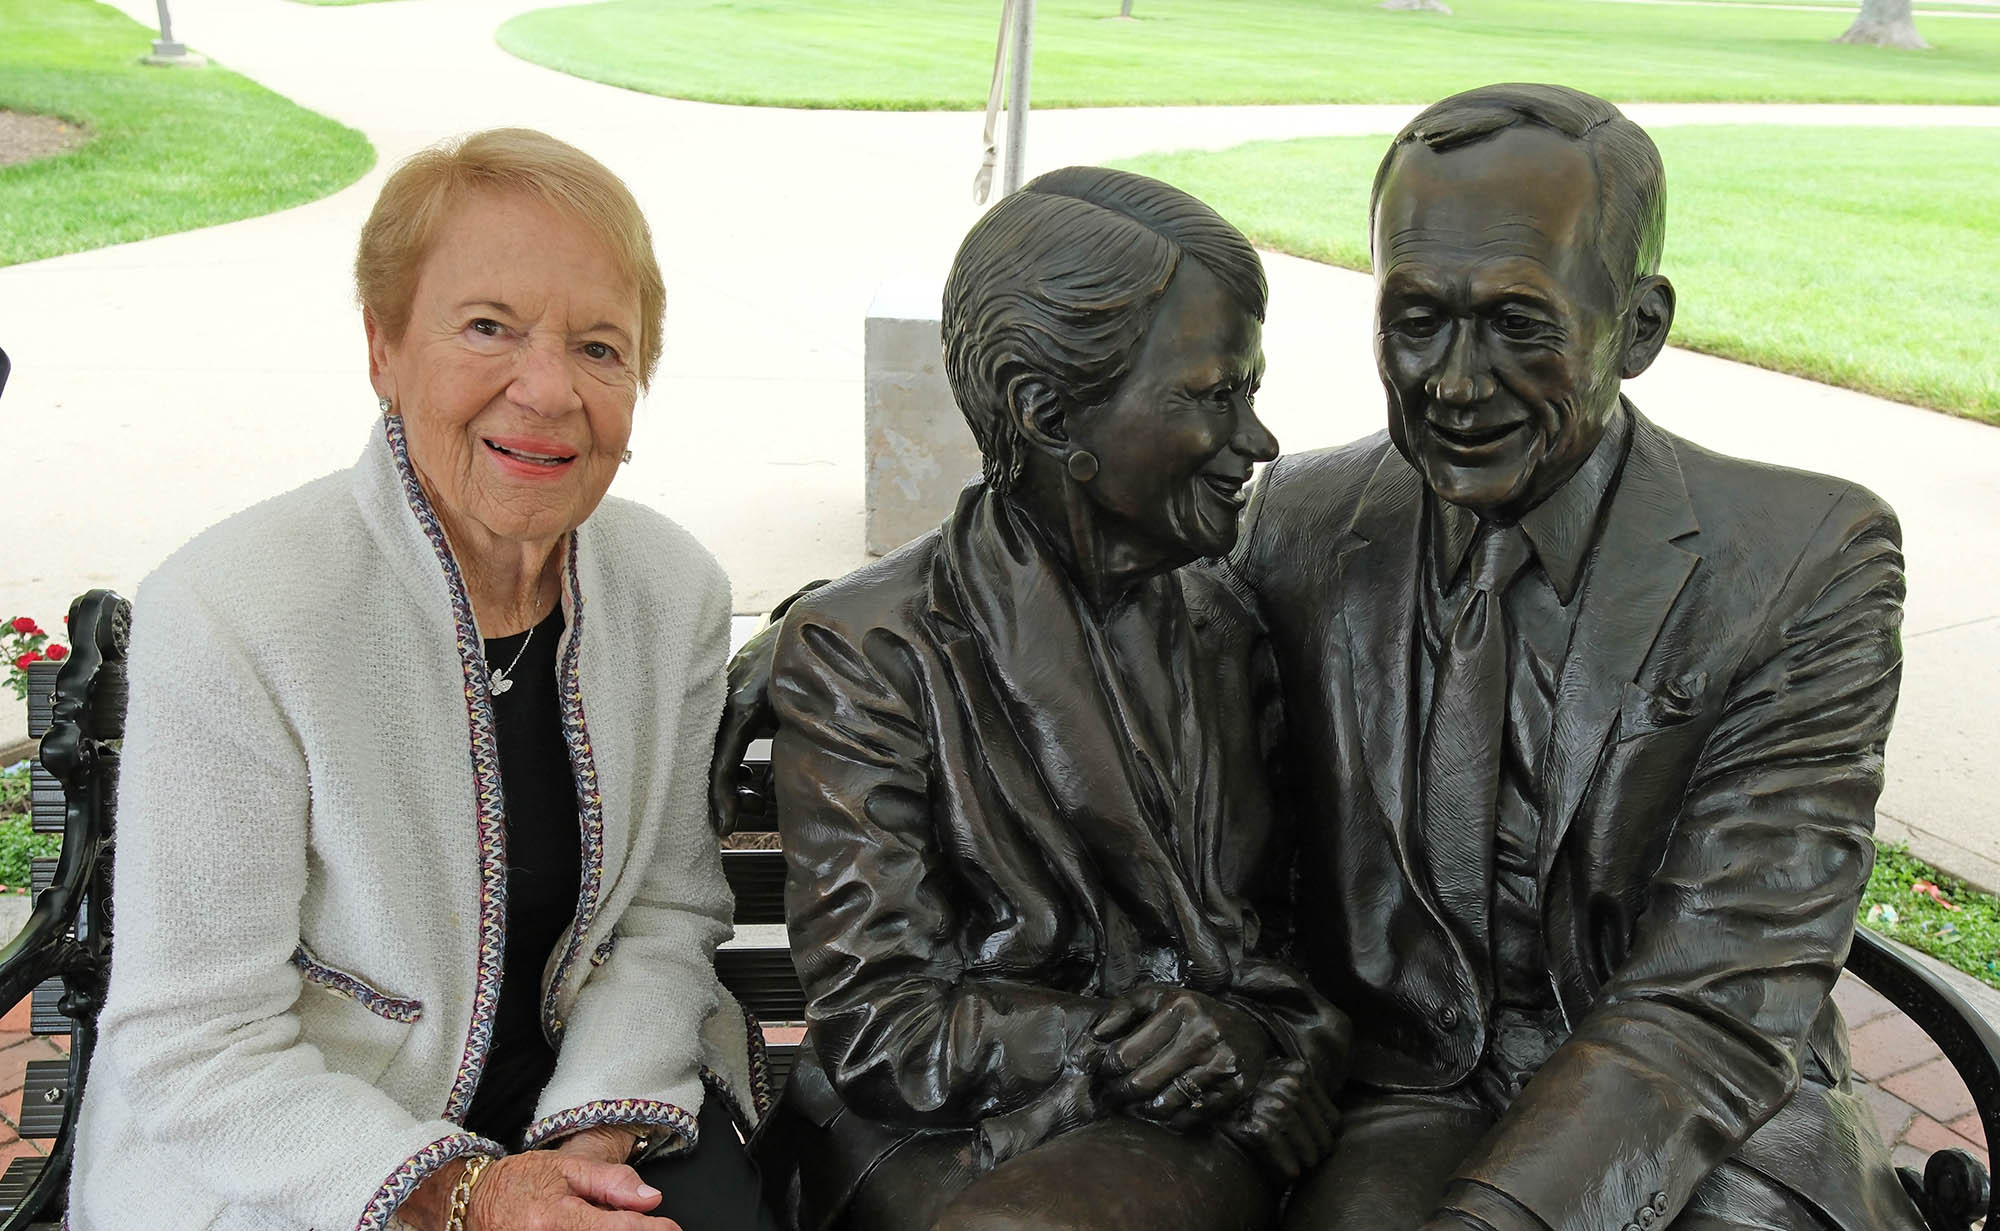 Joyce Farmer sitting with the sculpture